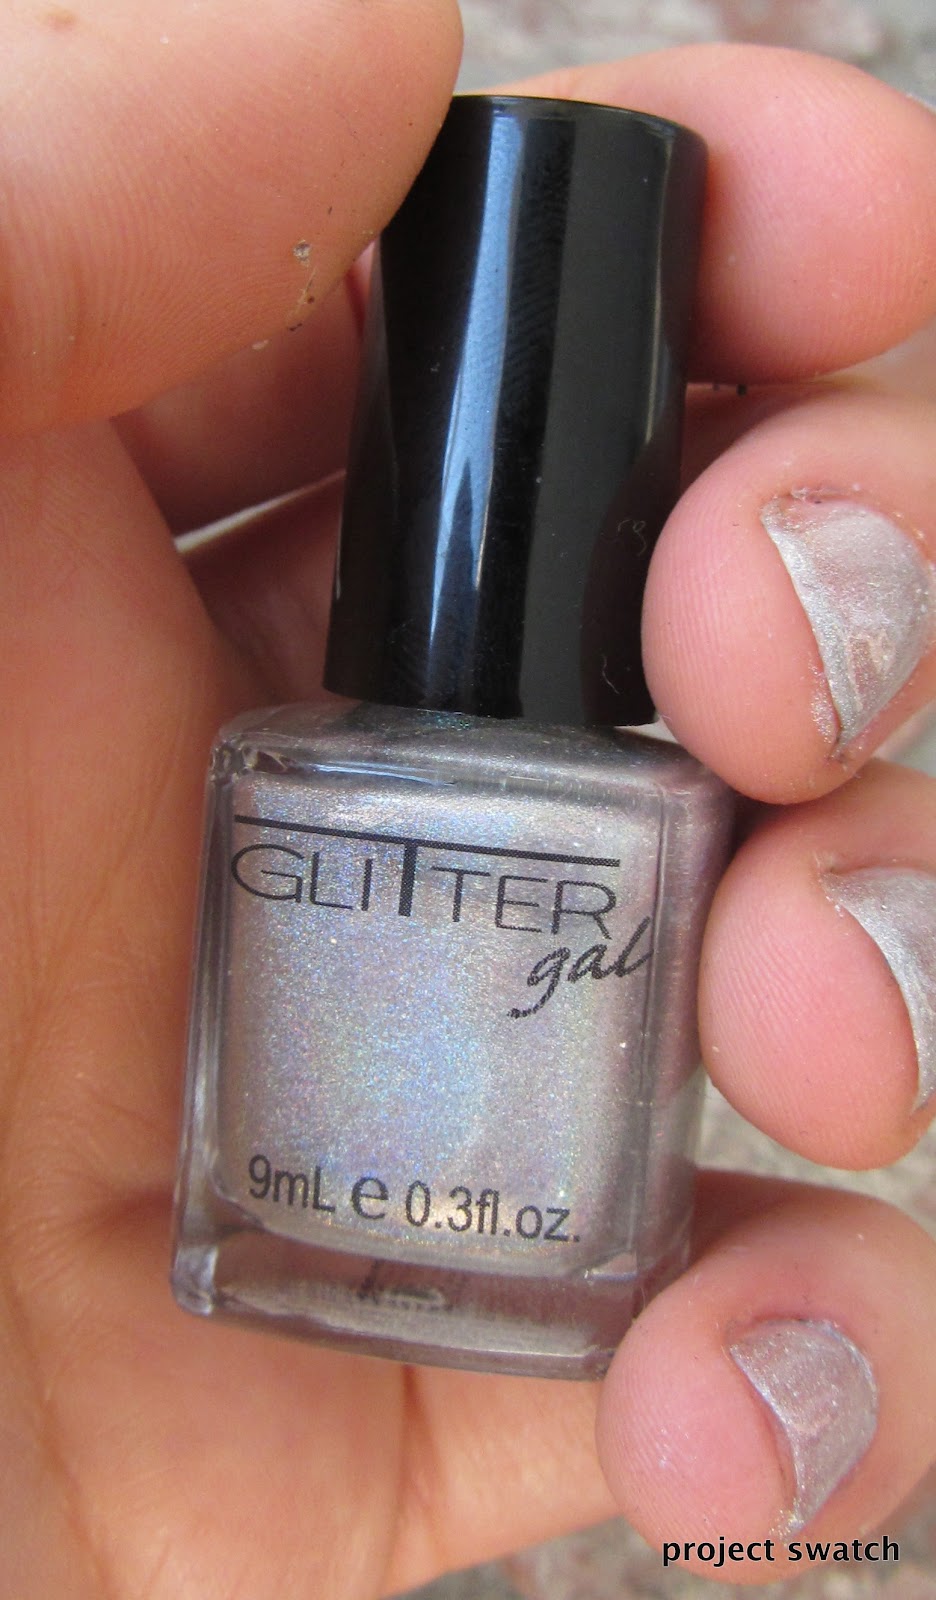 I recently discovered the amazing nail polish website llarowe, which sells a